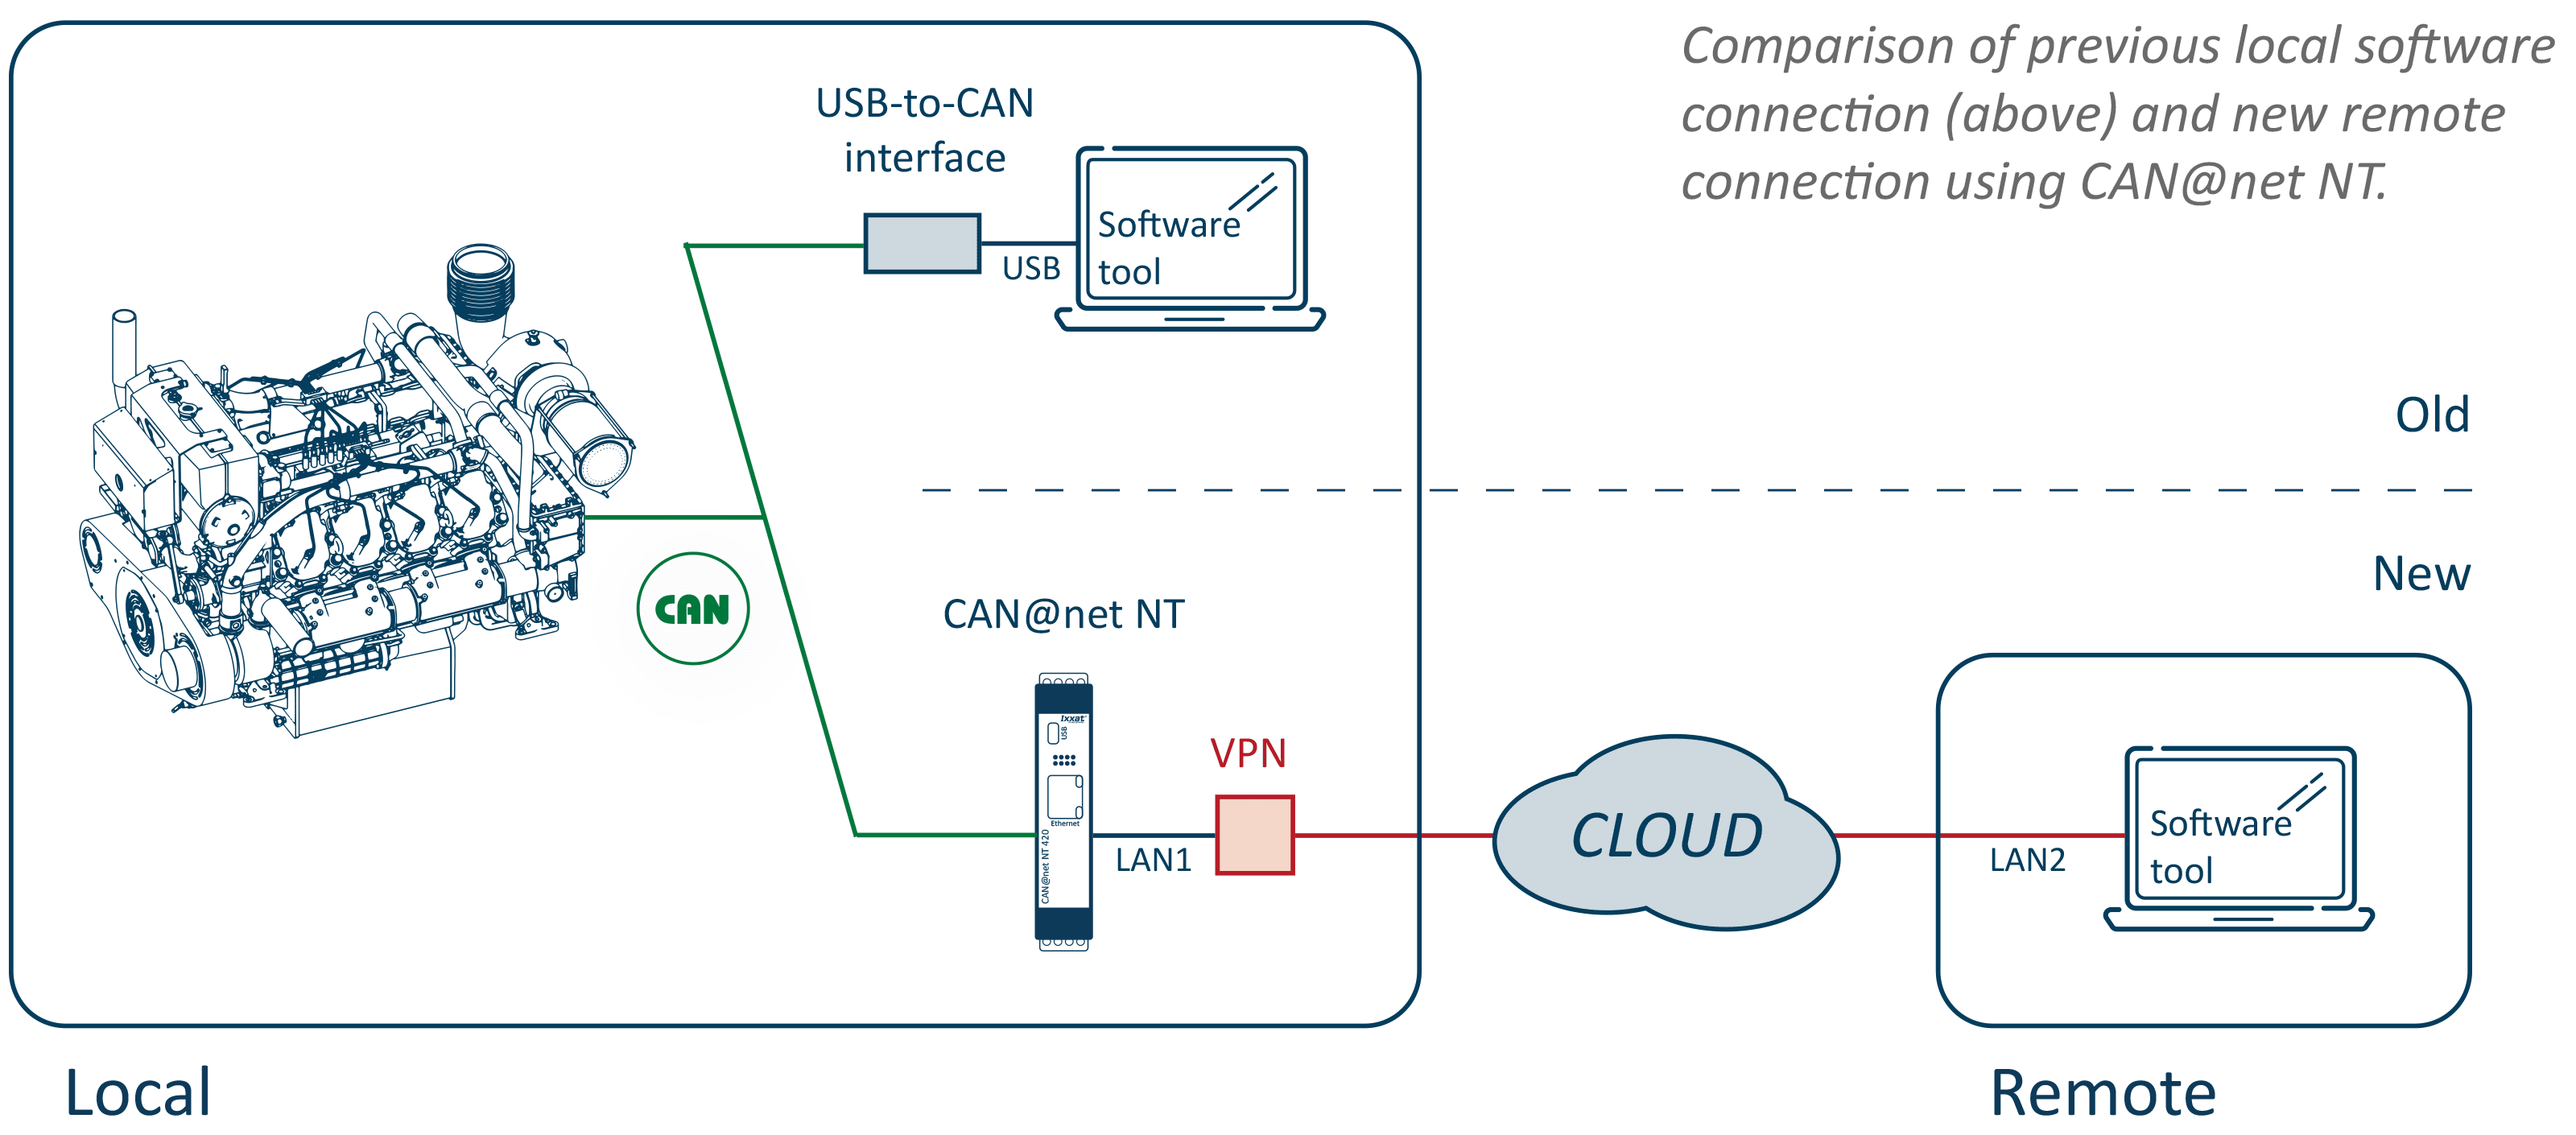 Engine diagnostics using VPN and CAN@net NT gateway